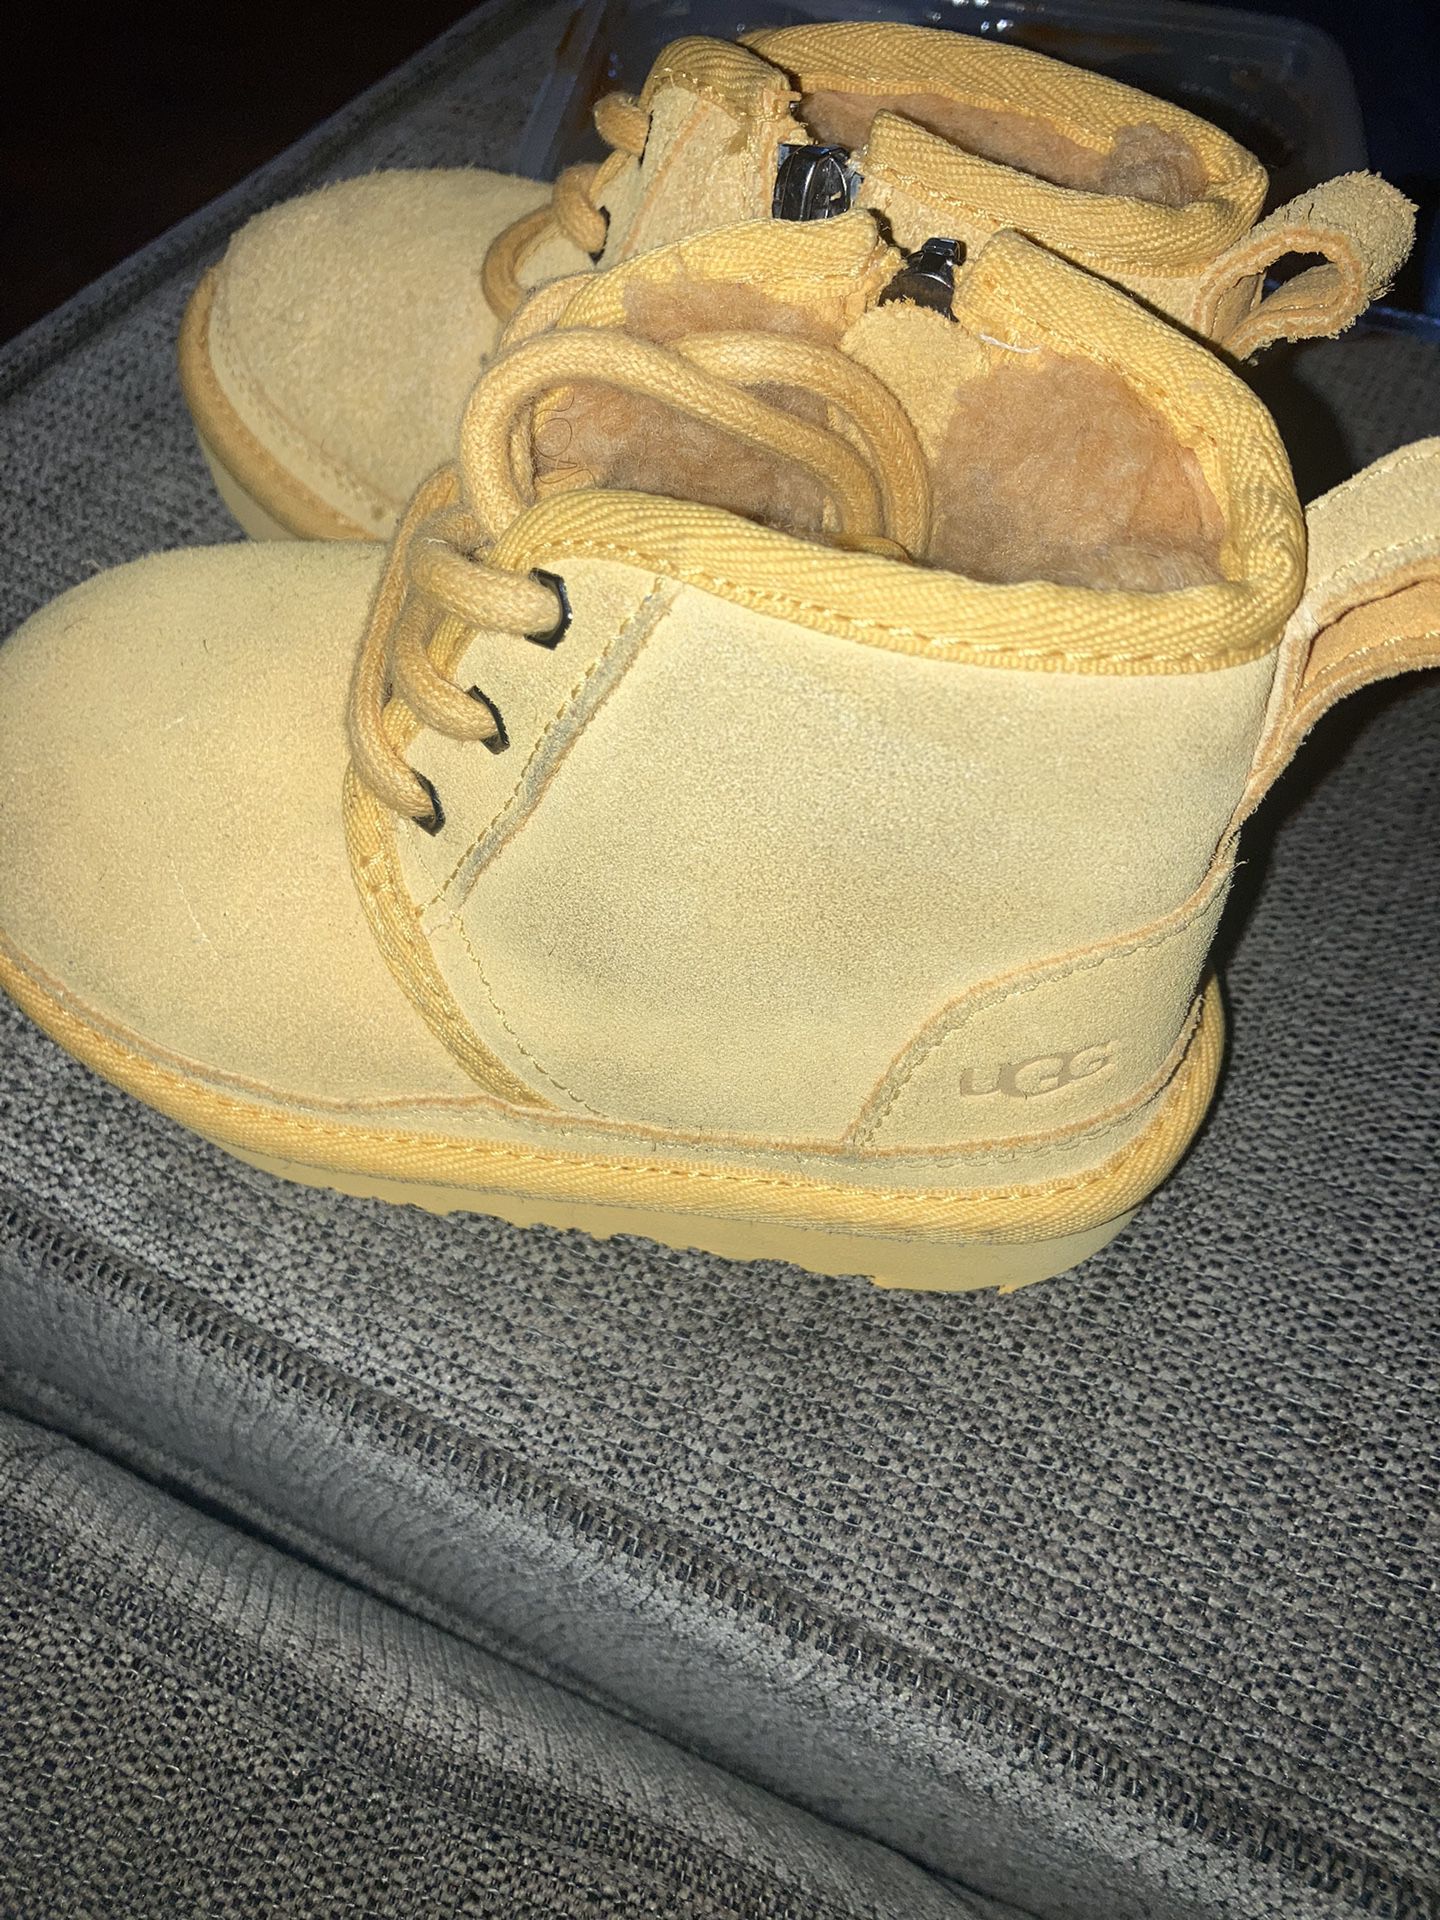 Toddler Ugg Boots 